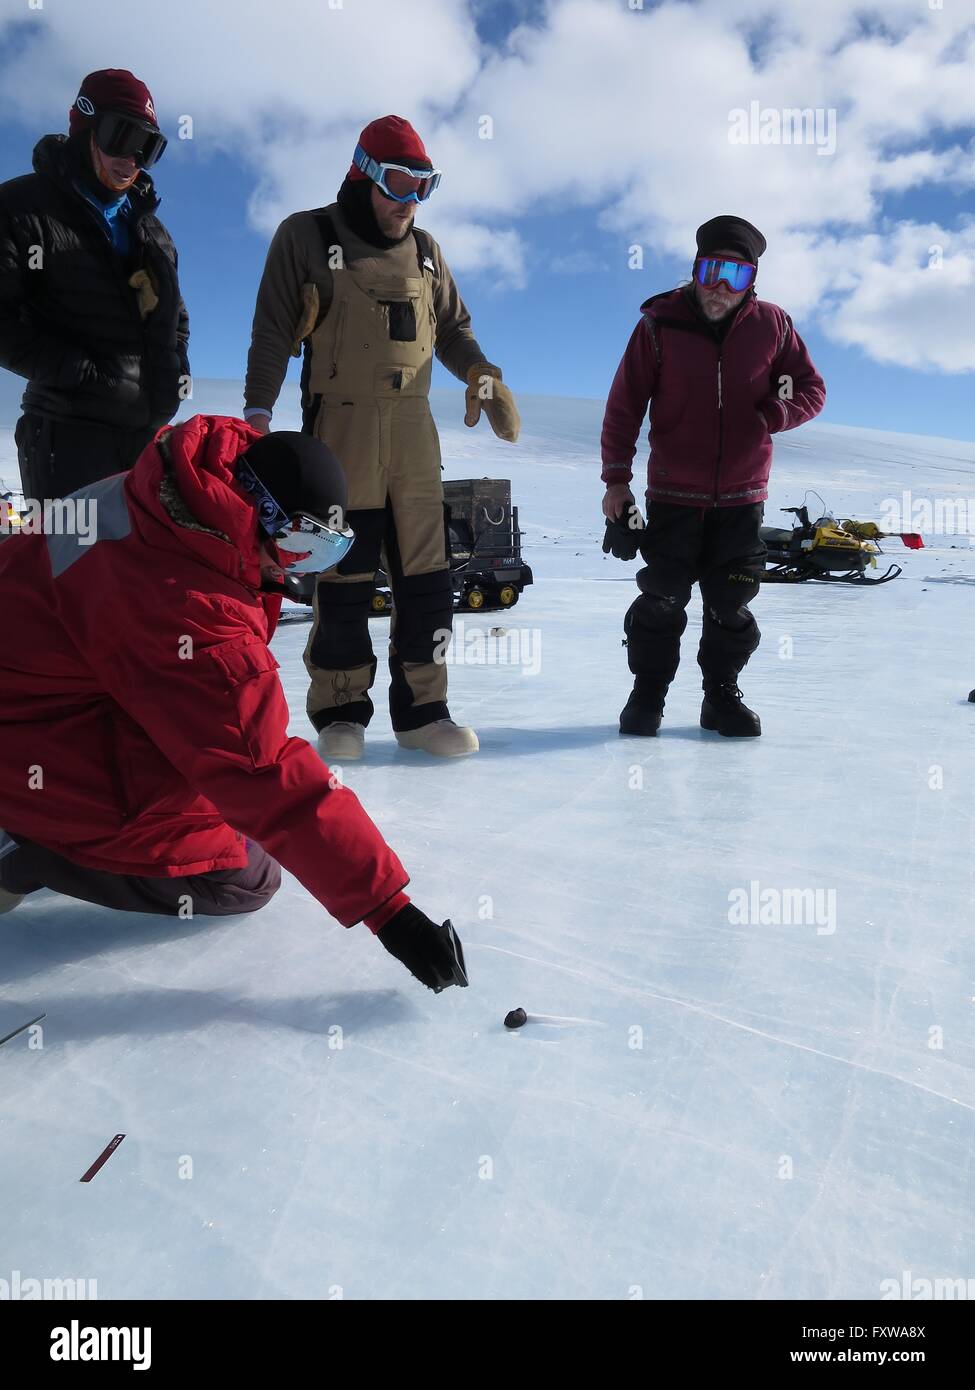 Researchers examine a meteorite found on the blue ice field in the Miller Range December 19, 2015 in Antarctica. Scientists collected 570 meteorite samples during a two-month expedition as part of the Antarctic Search for Meteorites program. Stock Photo